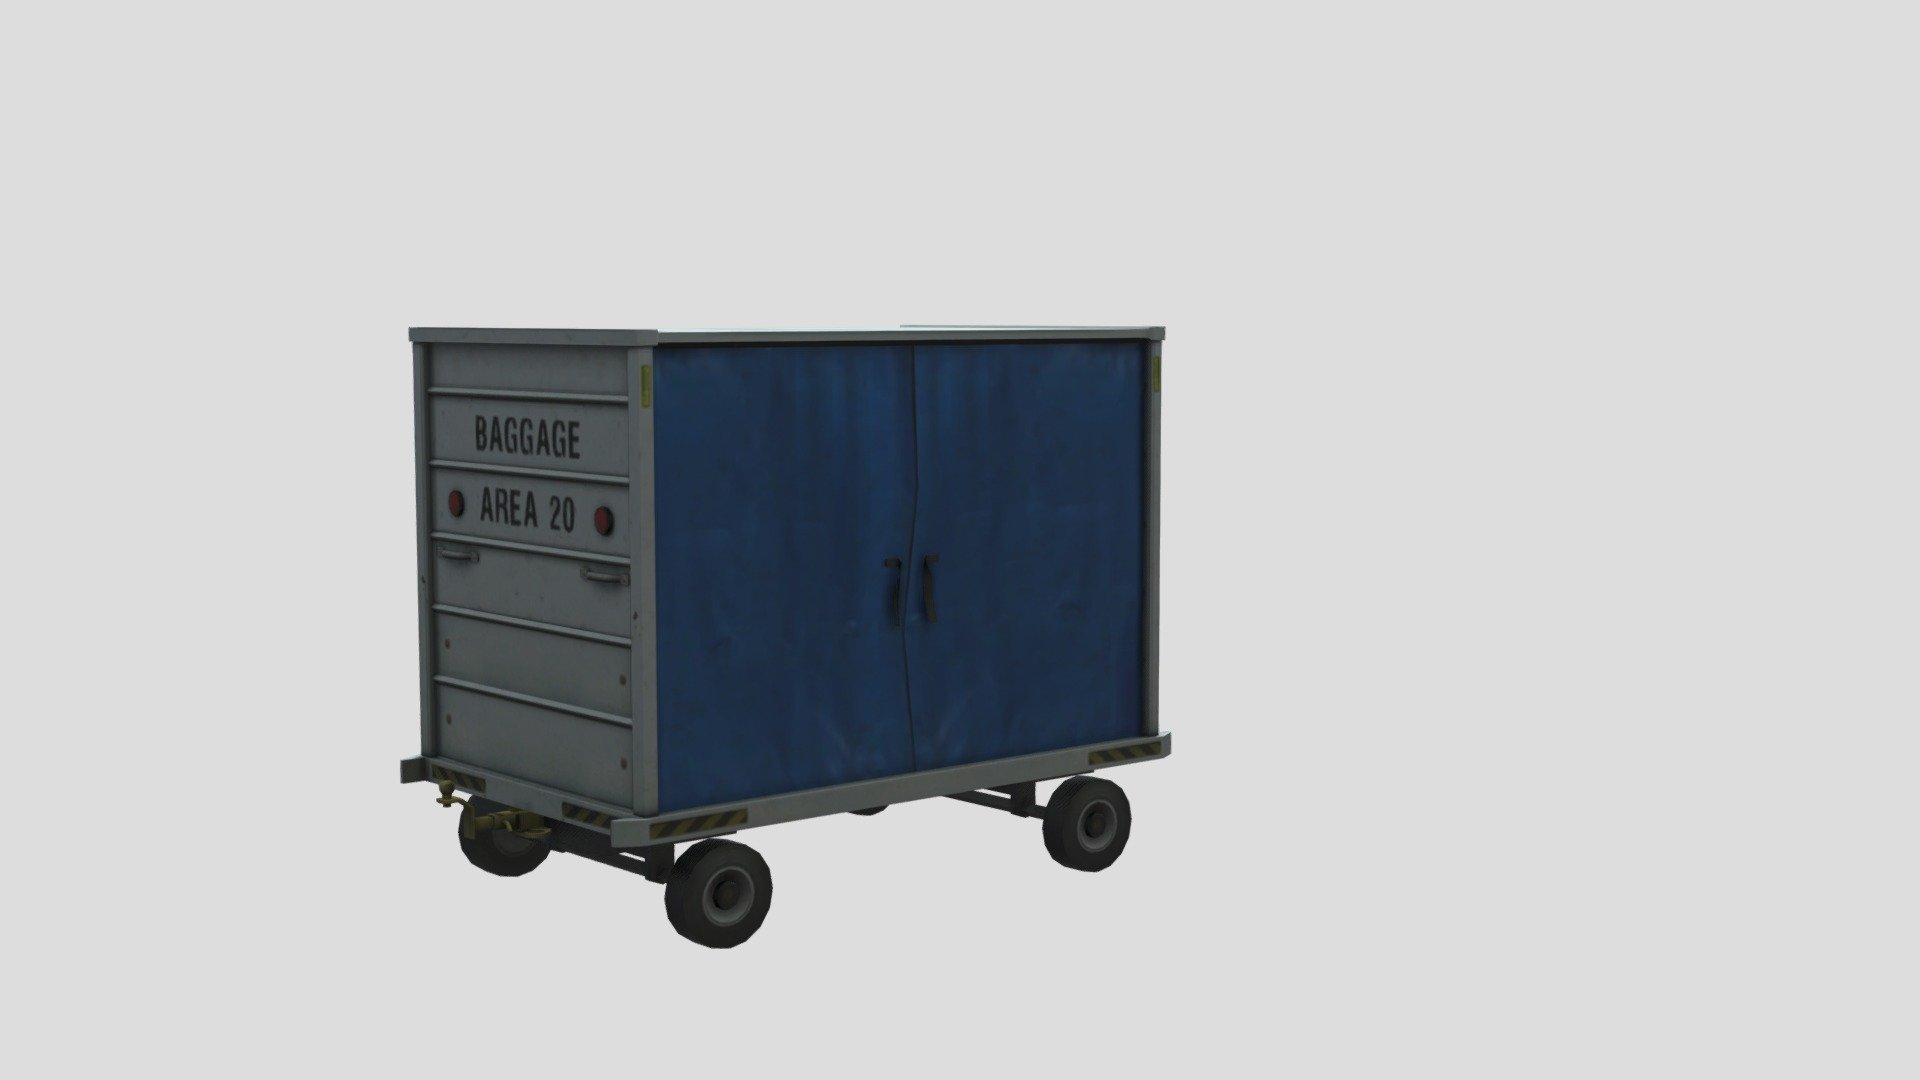 Airport baggage equipment (cart) lowpoly
3d model - Airport baggage equipment (cart) lowpoly - Download Free 3D model by propmaker1 (@menX1151) 3d model